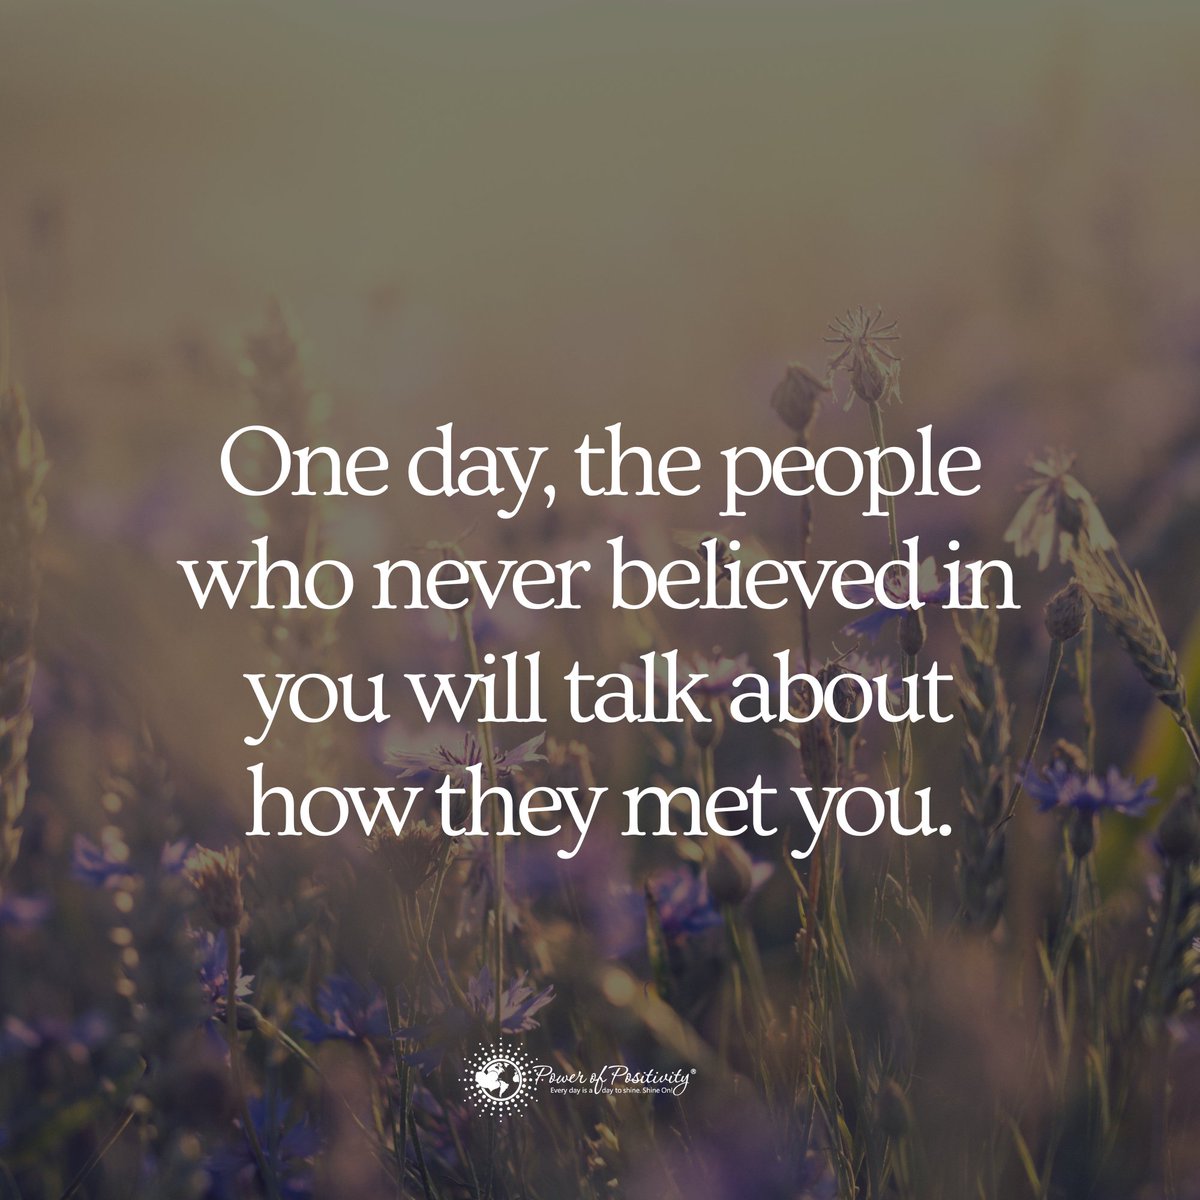 One day, the people who never believed in you will talk about how they met you.